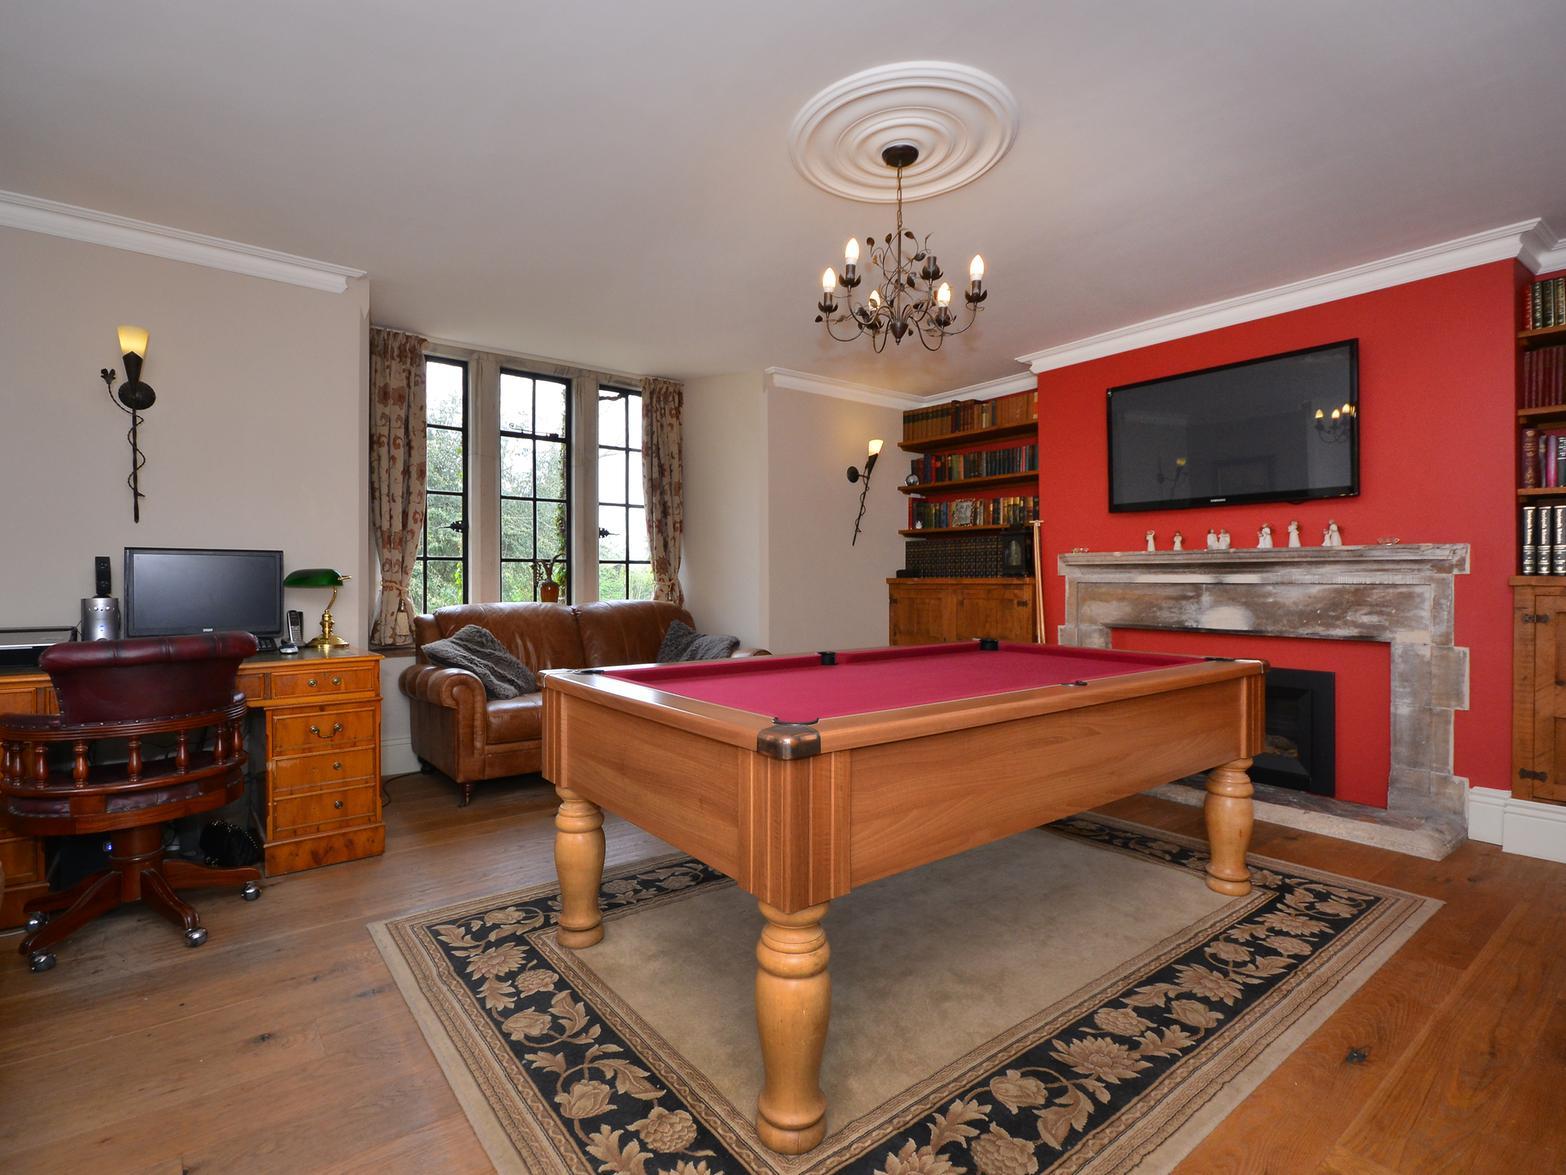 The house even has a room with a pool table.